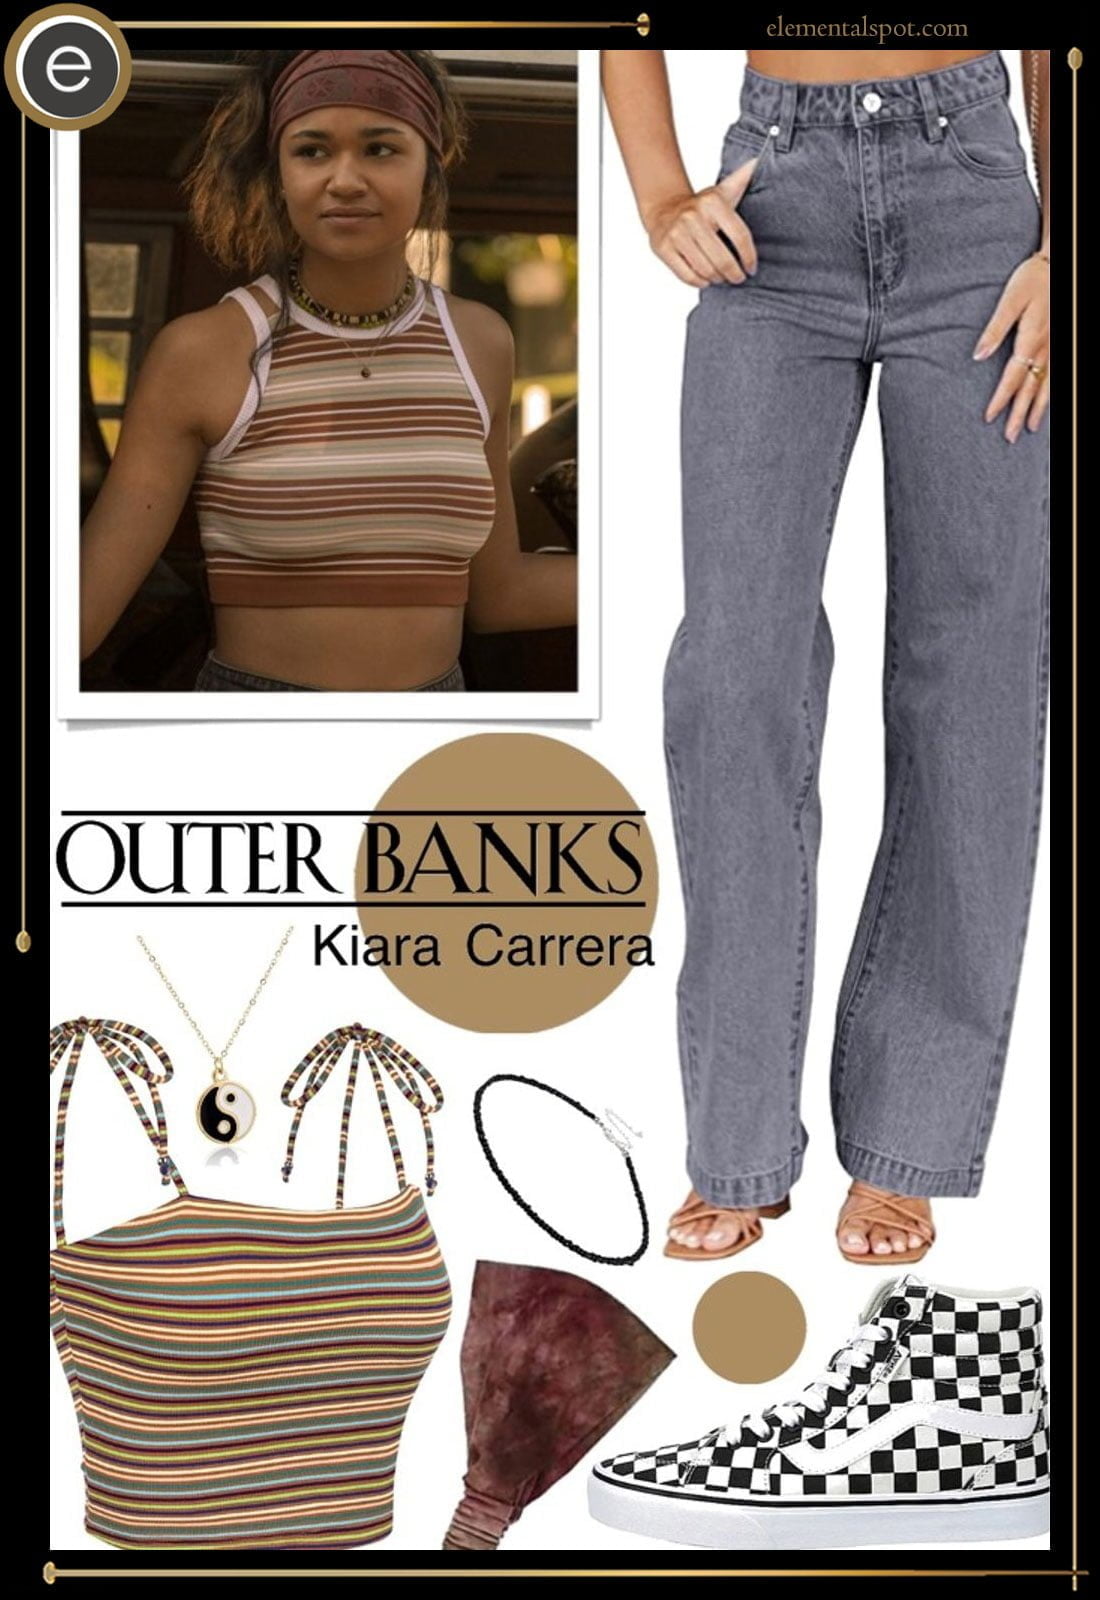 Steal the Look - Dress Like Kiara Carrera from Outer Banks - Elemental Spot